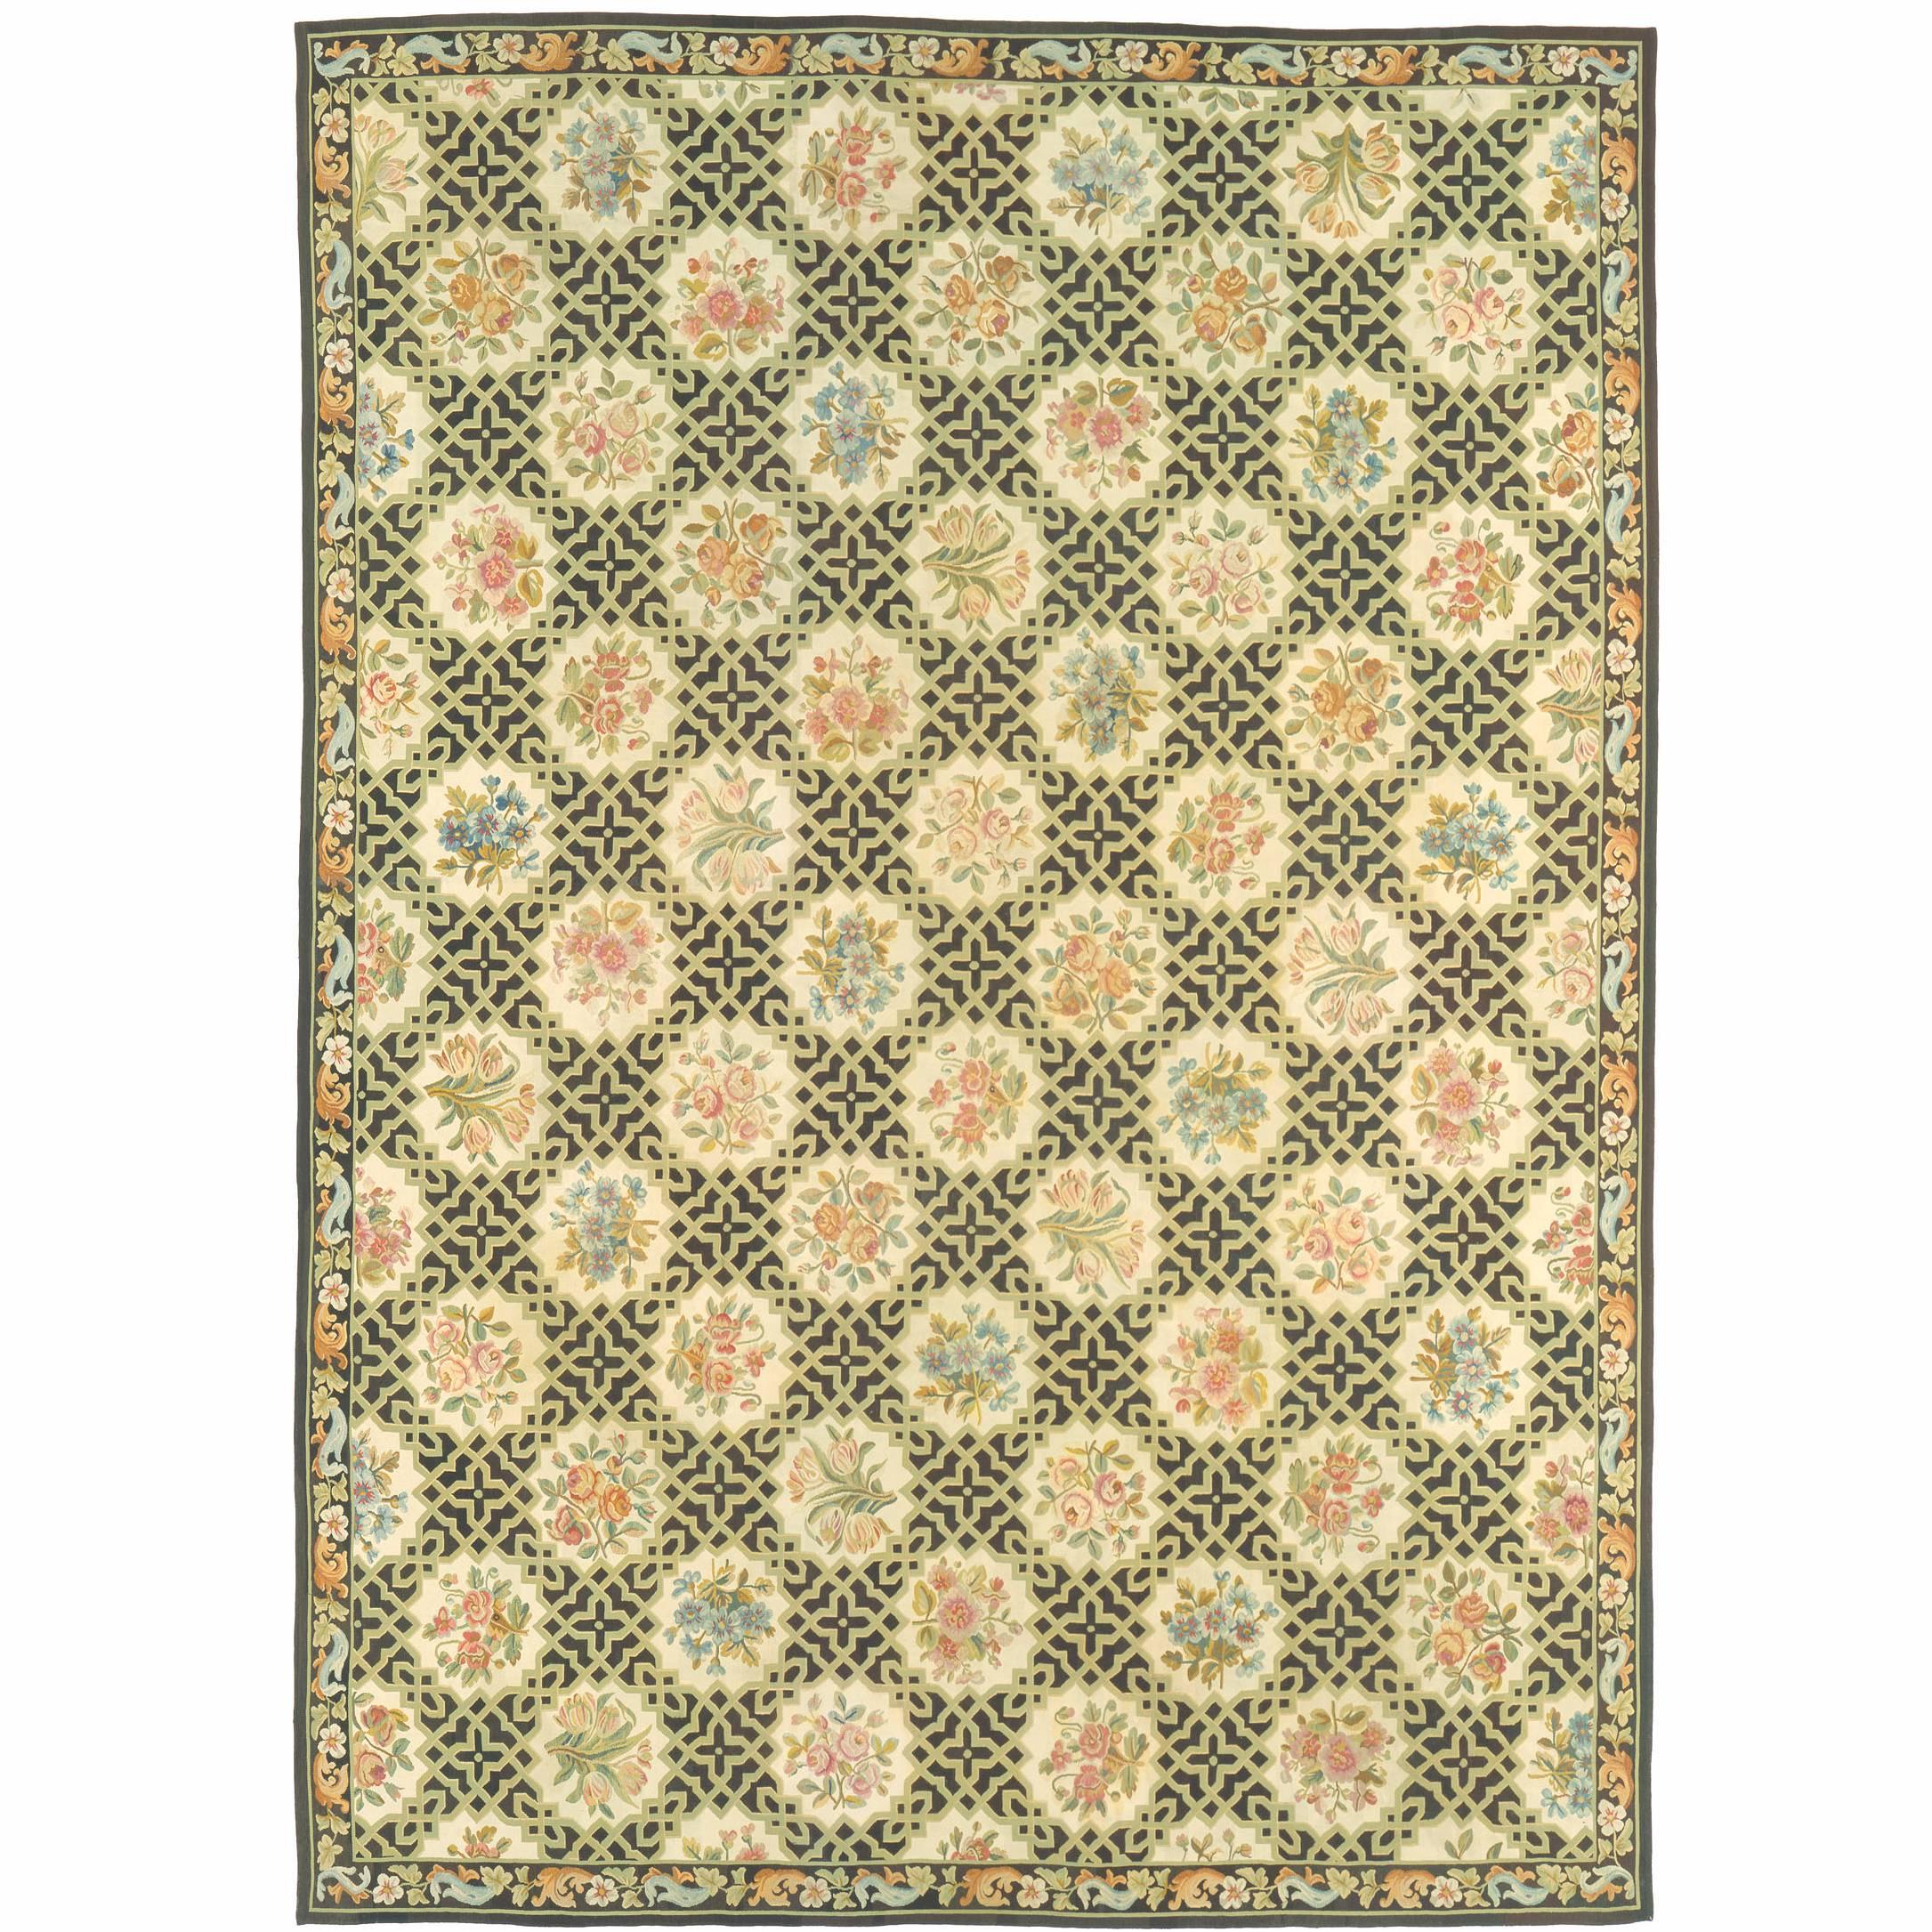 Early 20th Century Aubusson Carpet